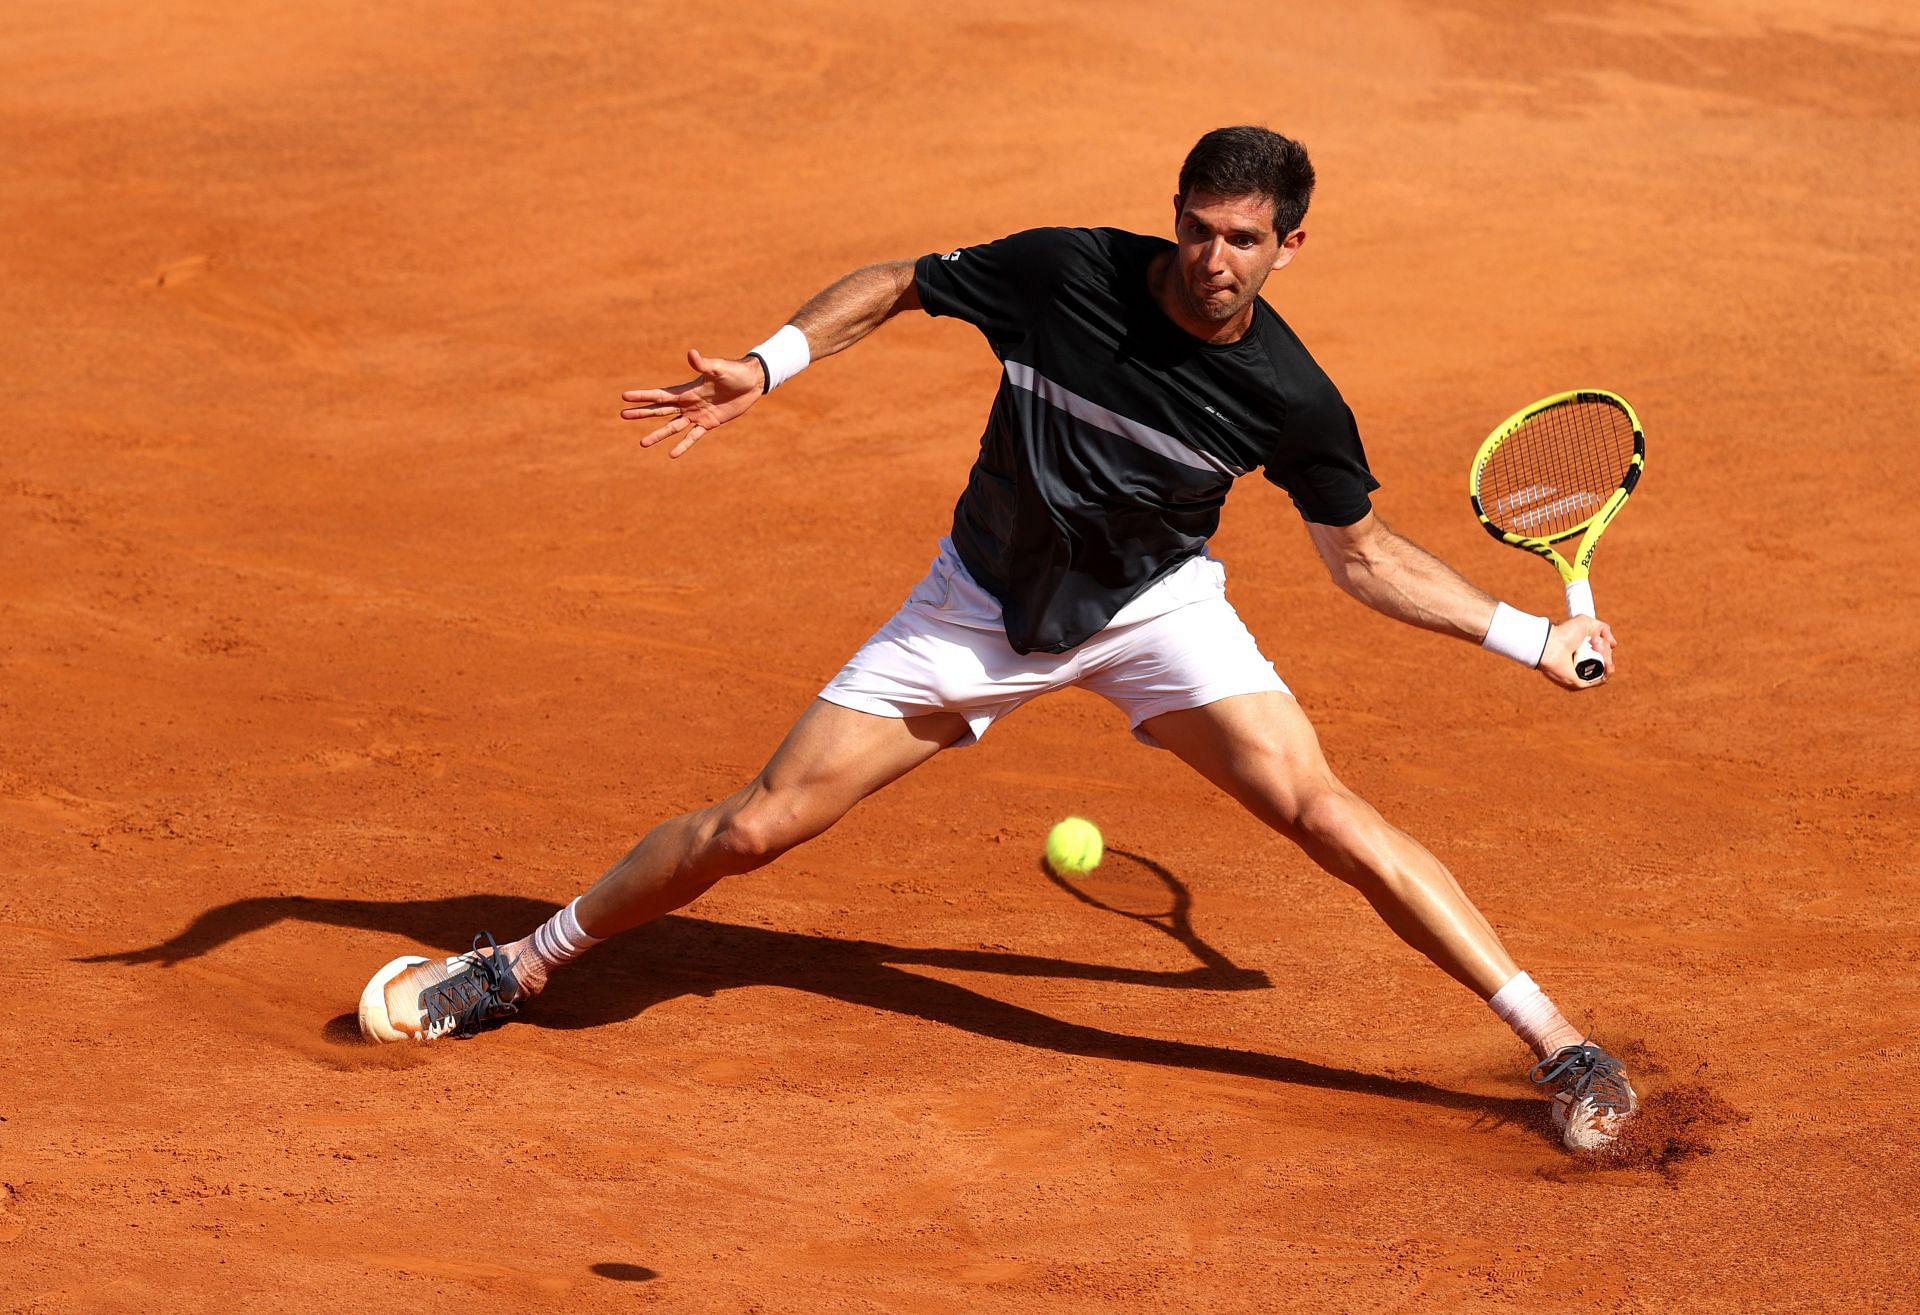 Federico Delbonis is the sixth seed.